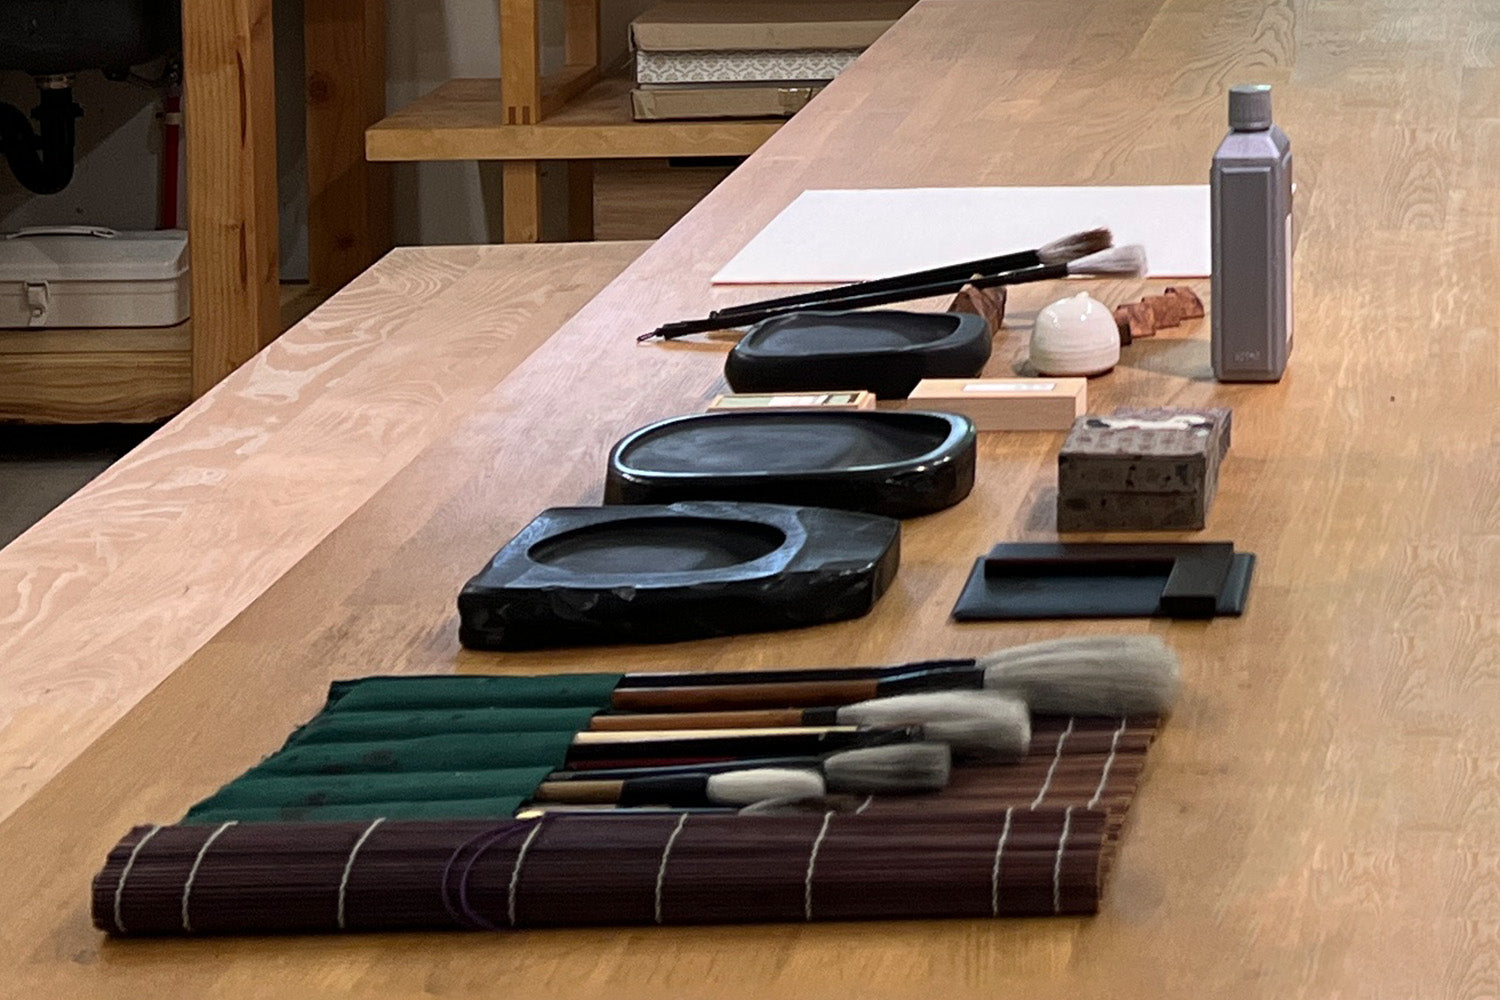 Fluffy brushes, ink pads and other calligraphy tools sit neatly-arranged on a work table in Aoi Yamaguchi’s studio.